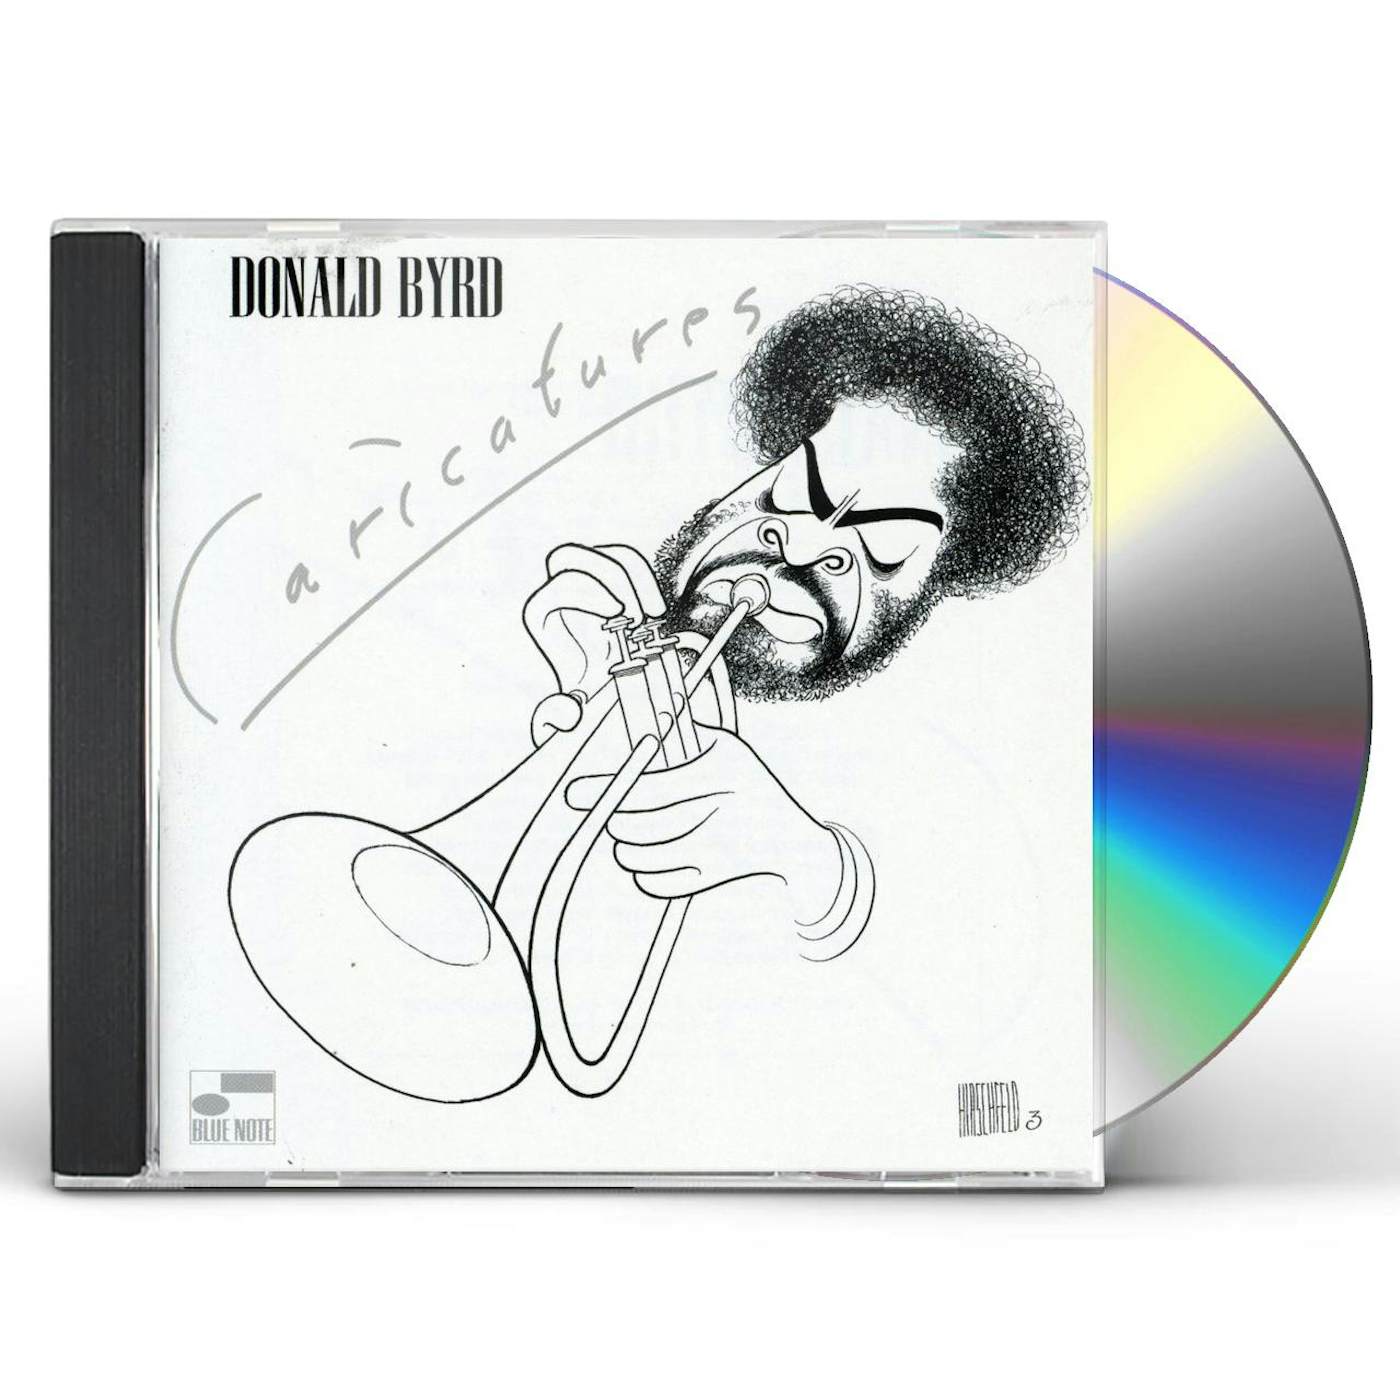 Donald Byrd CARICATURES CD